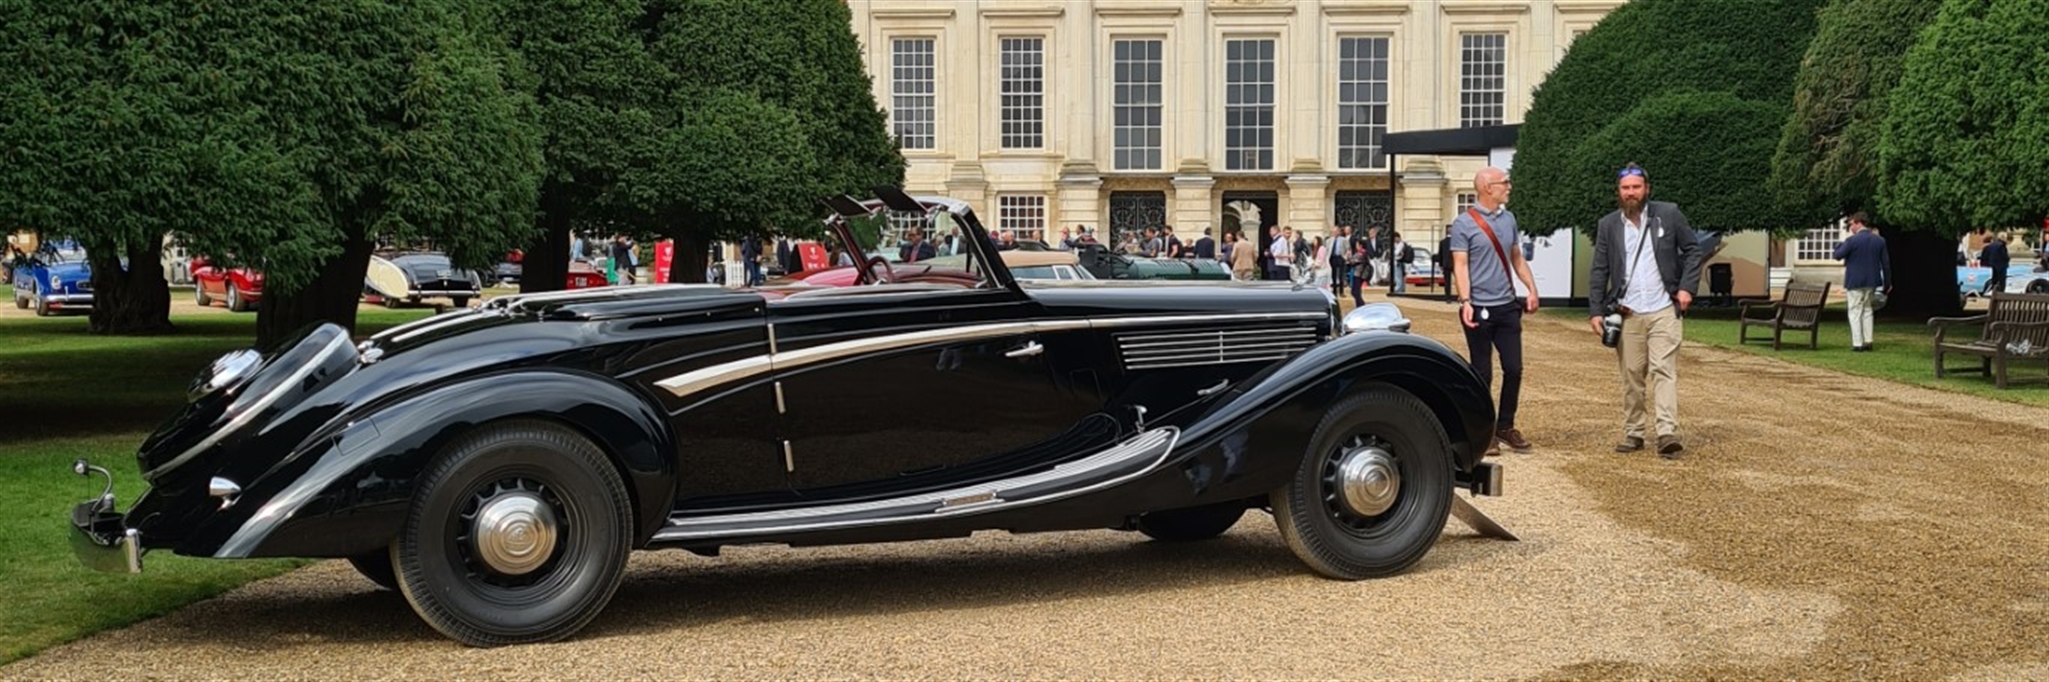 World-class cars attend the tenth annual Concours of Elegance at